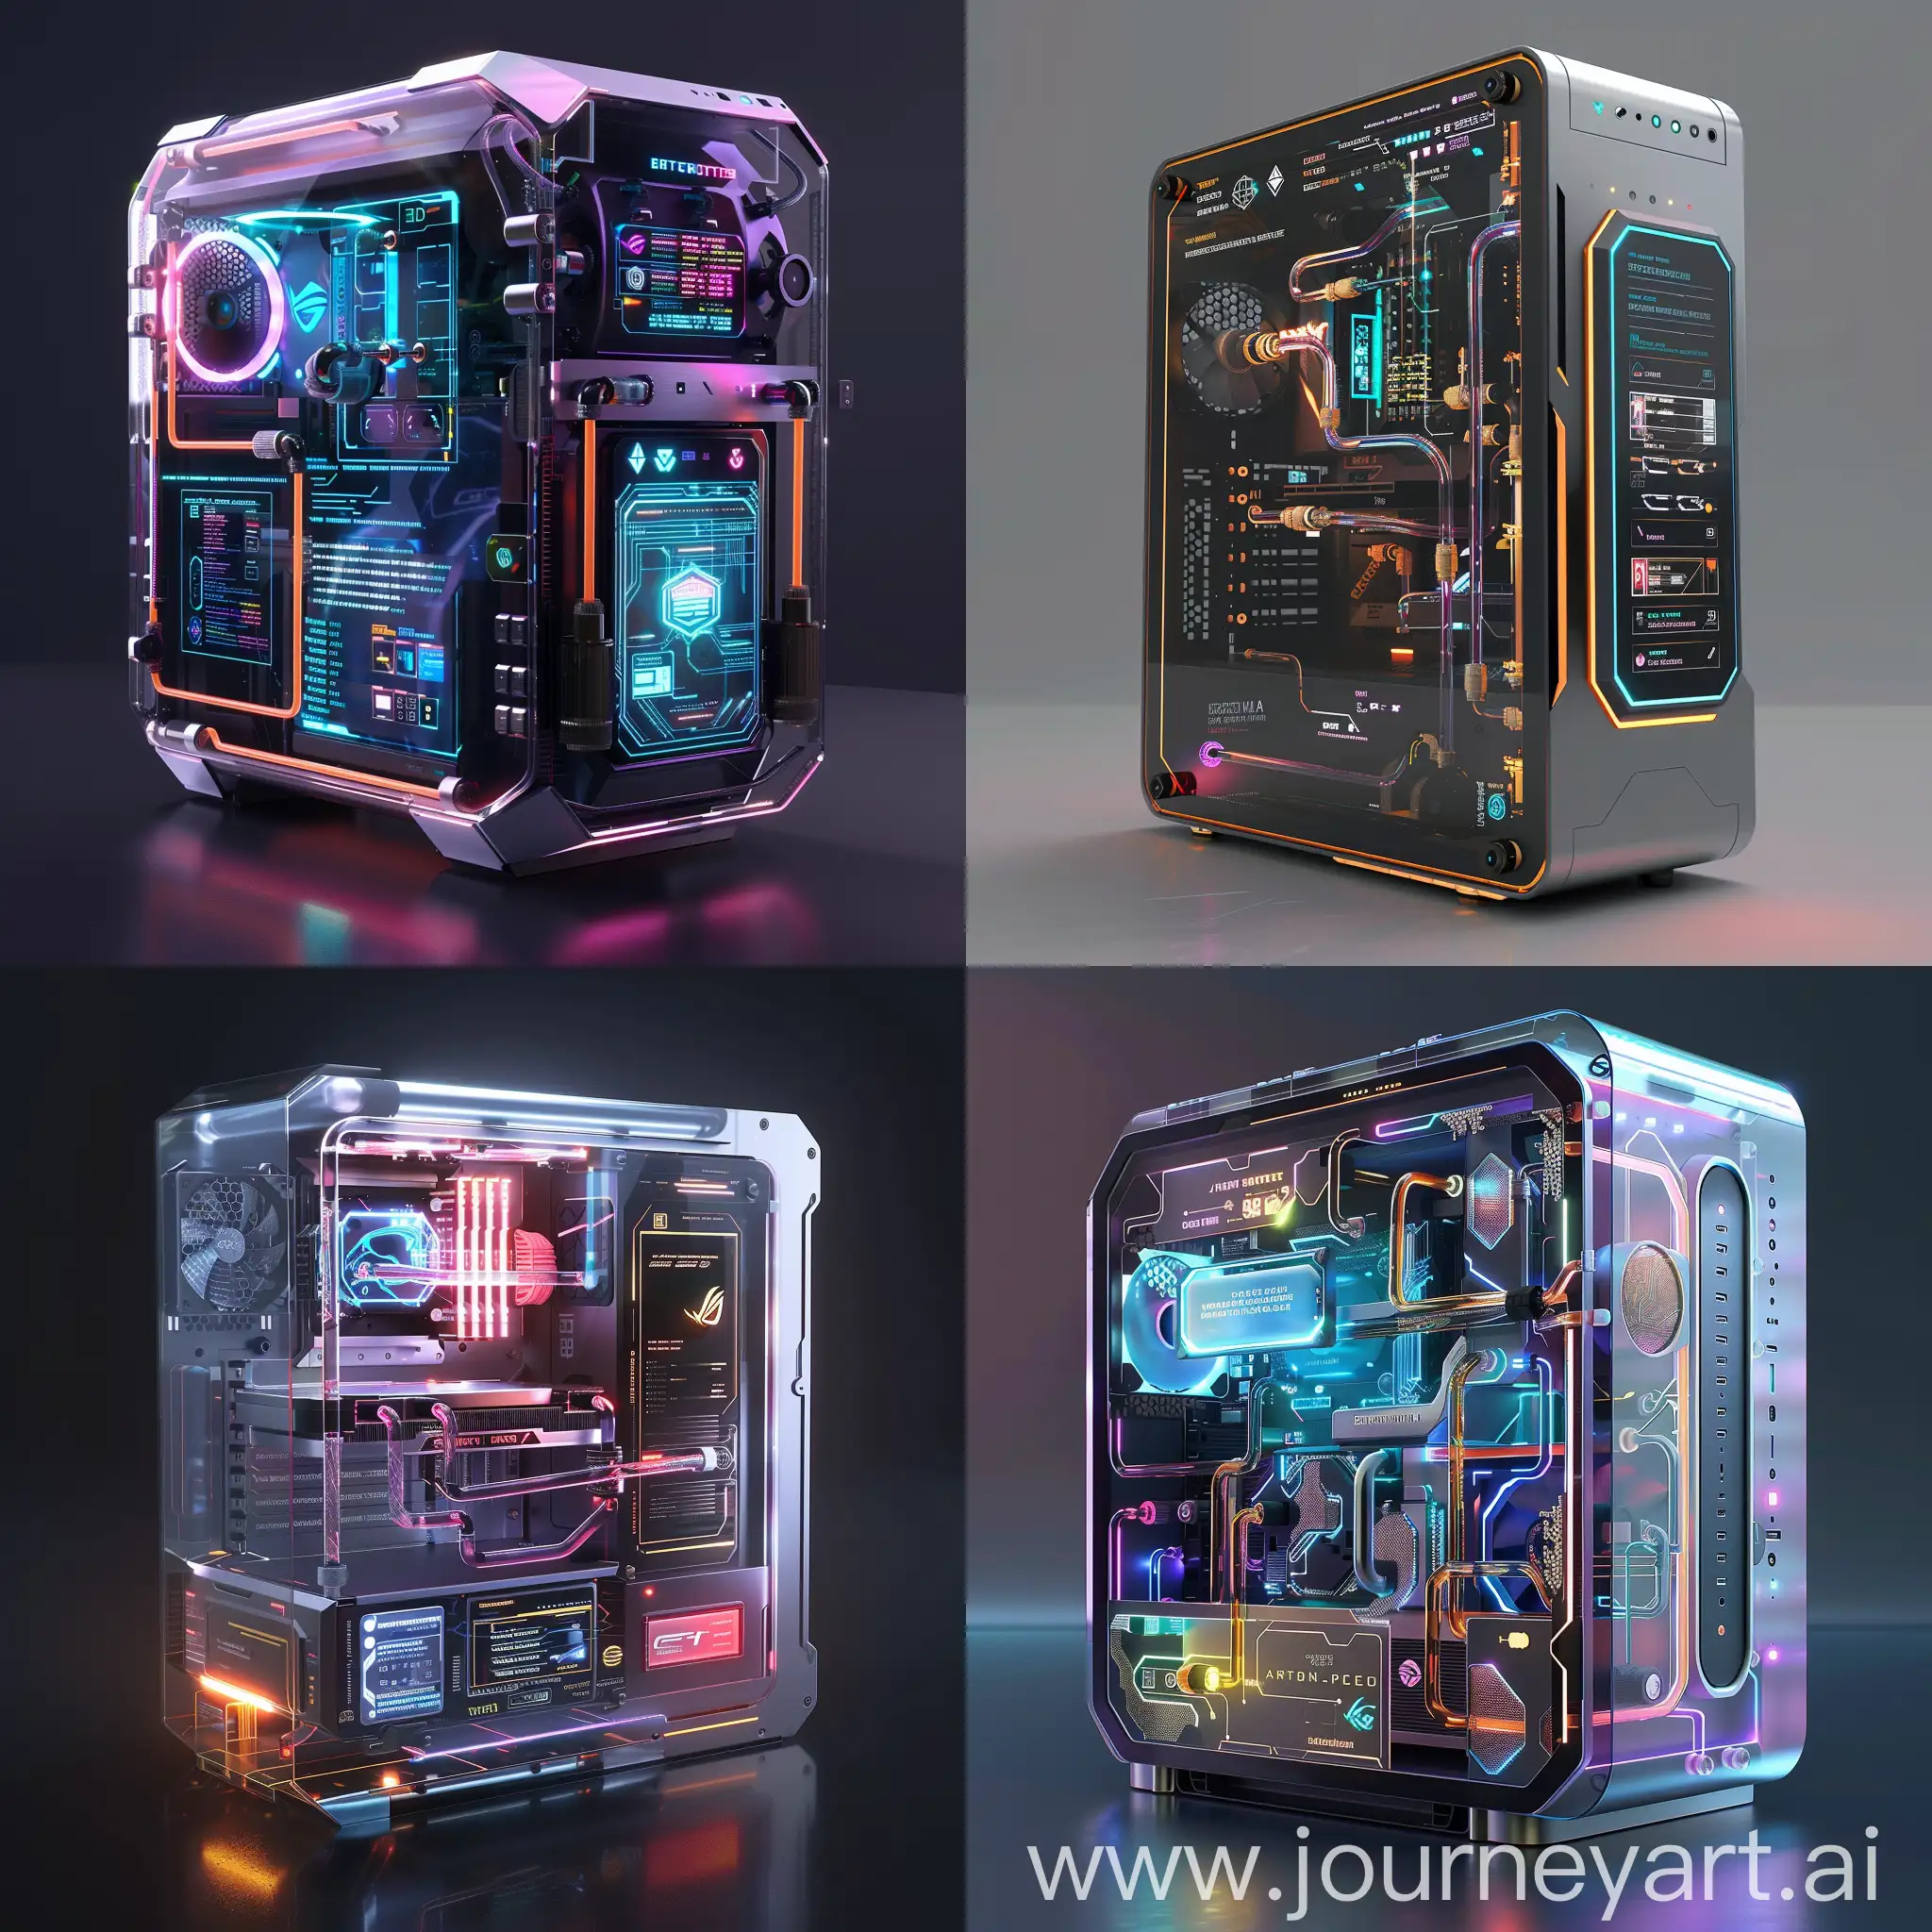 Futuristic-Modular-PC-Case-with-Transparent-Panels-and-Holographic-Interfaces